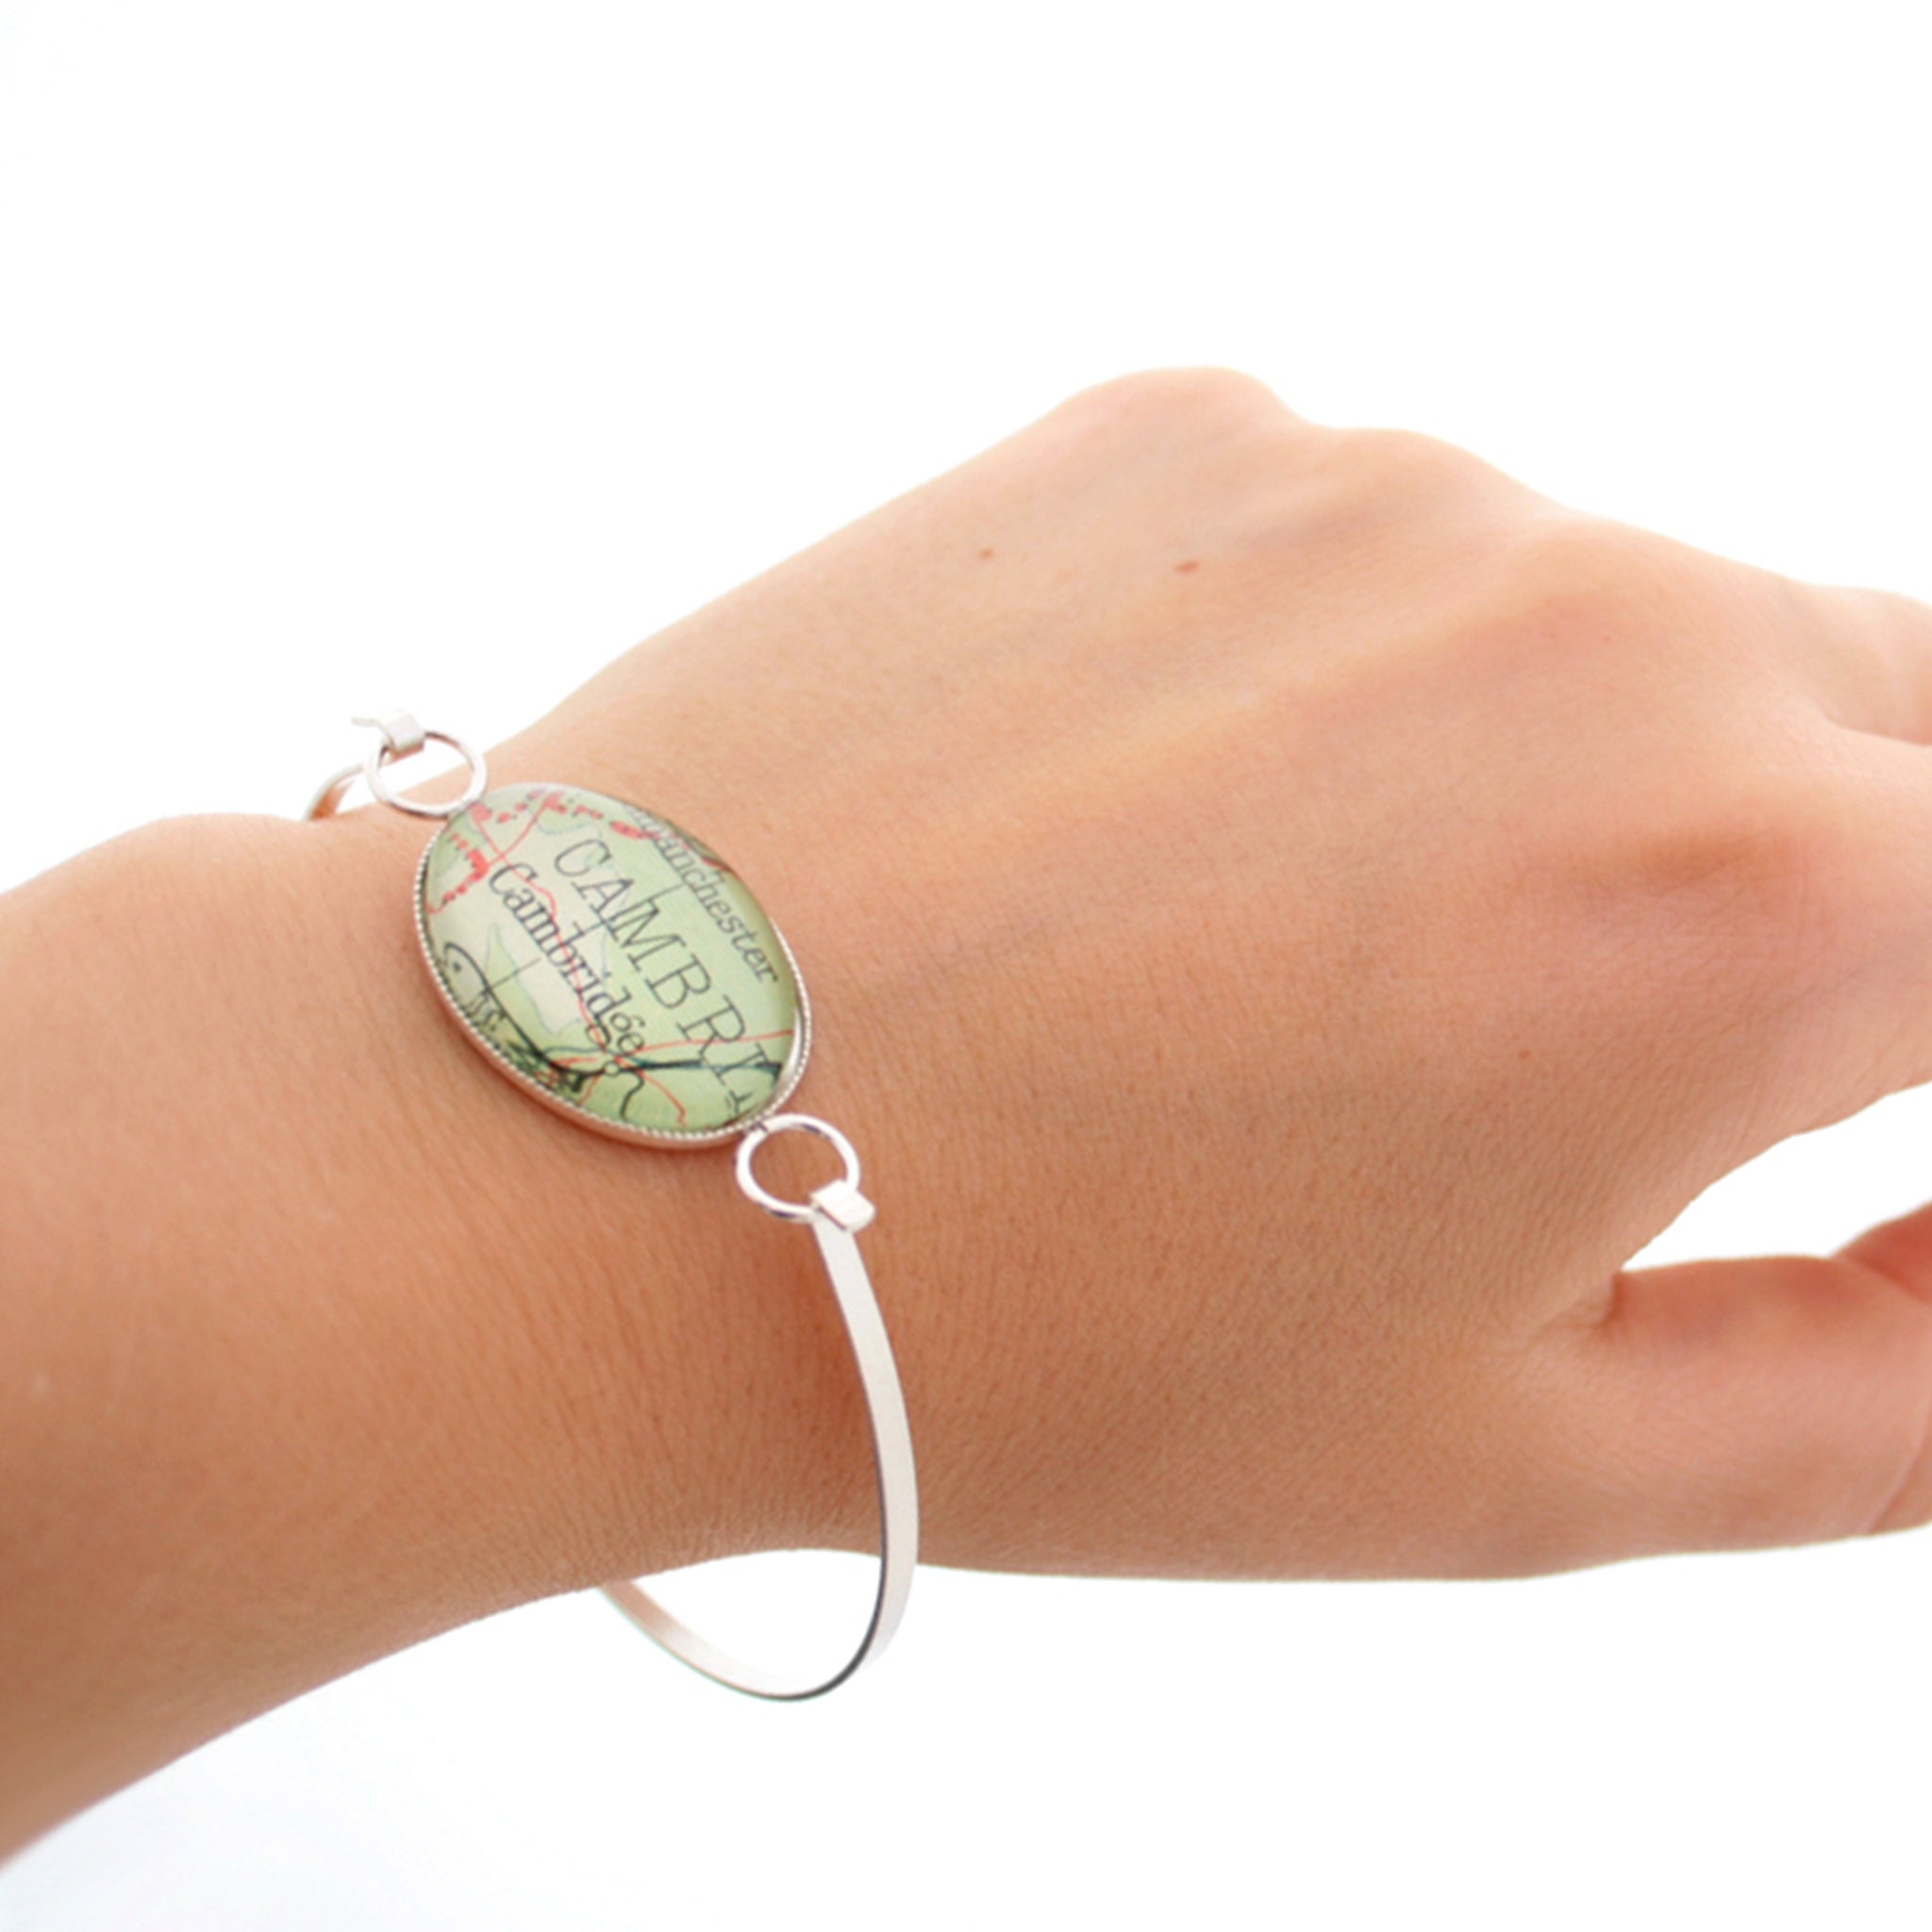 Sterling silver bangle bracelet featuring map of Cambridge worn on hand